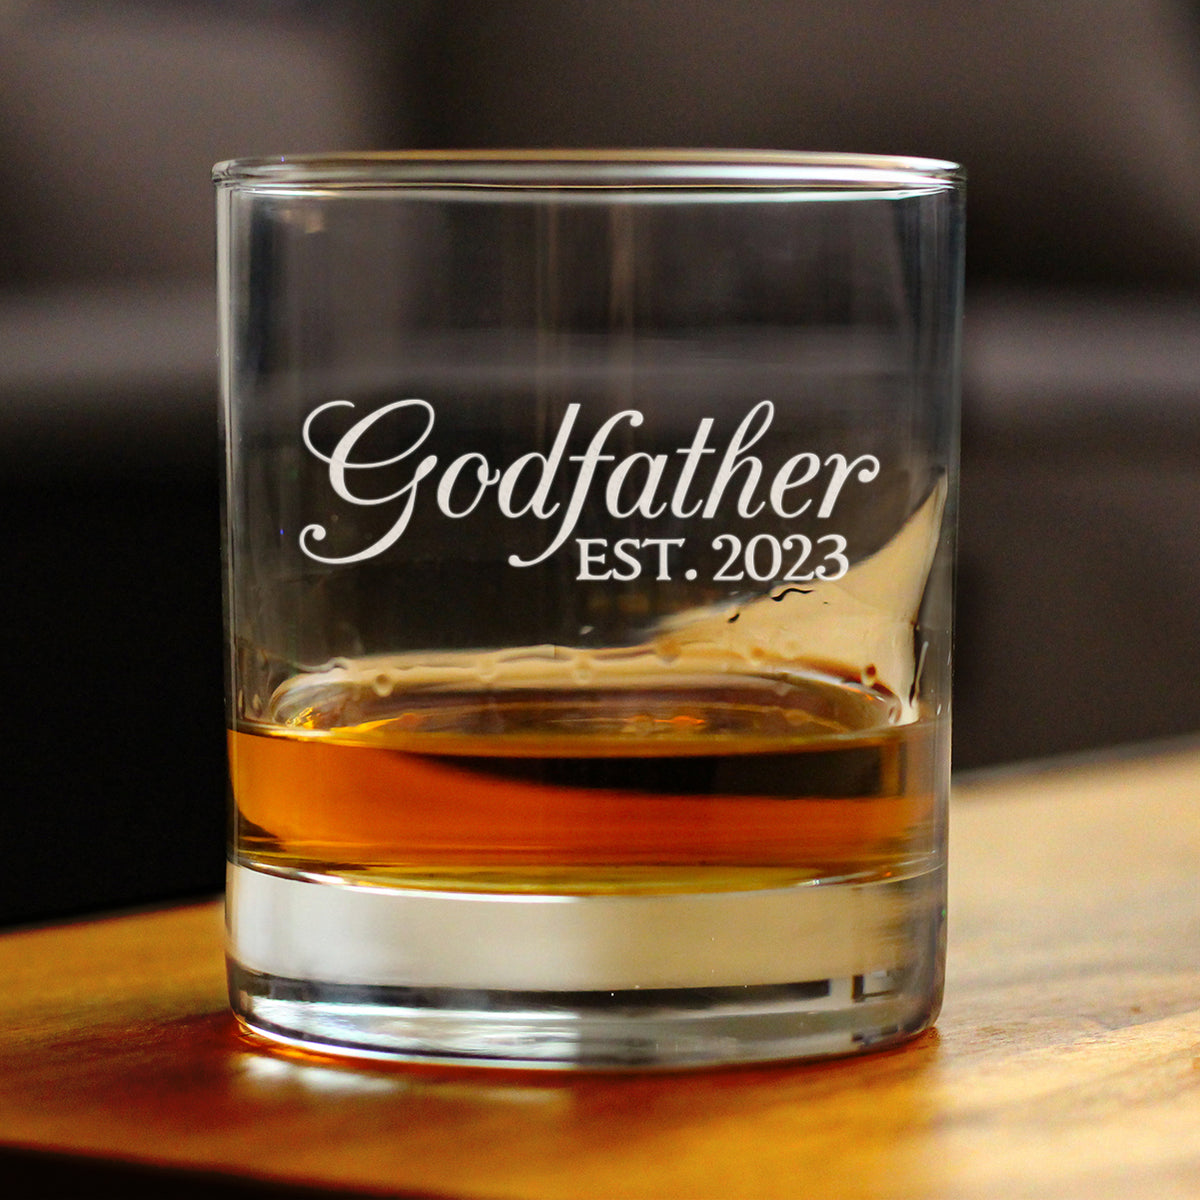 Godfather Est. 2023 - Decorative 10 oz Rocks Glass or Old Fashioned Glass - Baby Shower Gift - Pregnancy Reveal Gift for New Godfathers